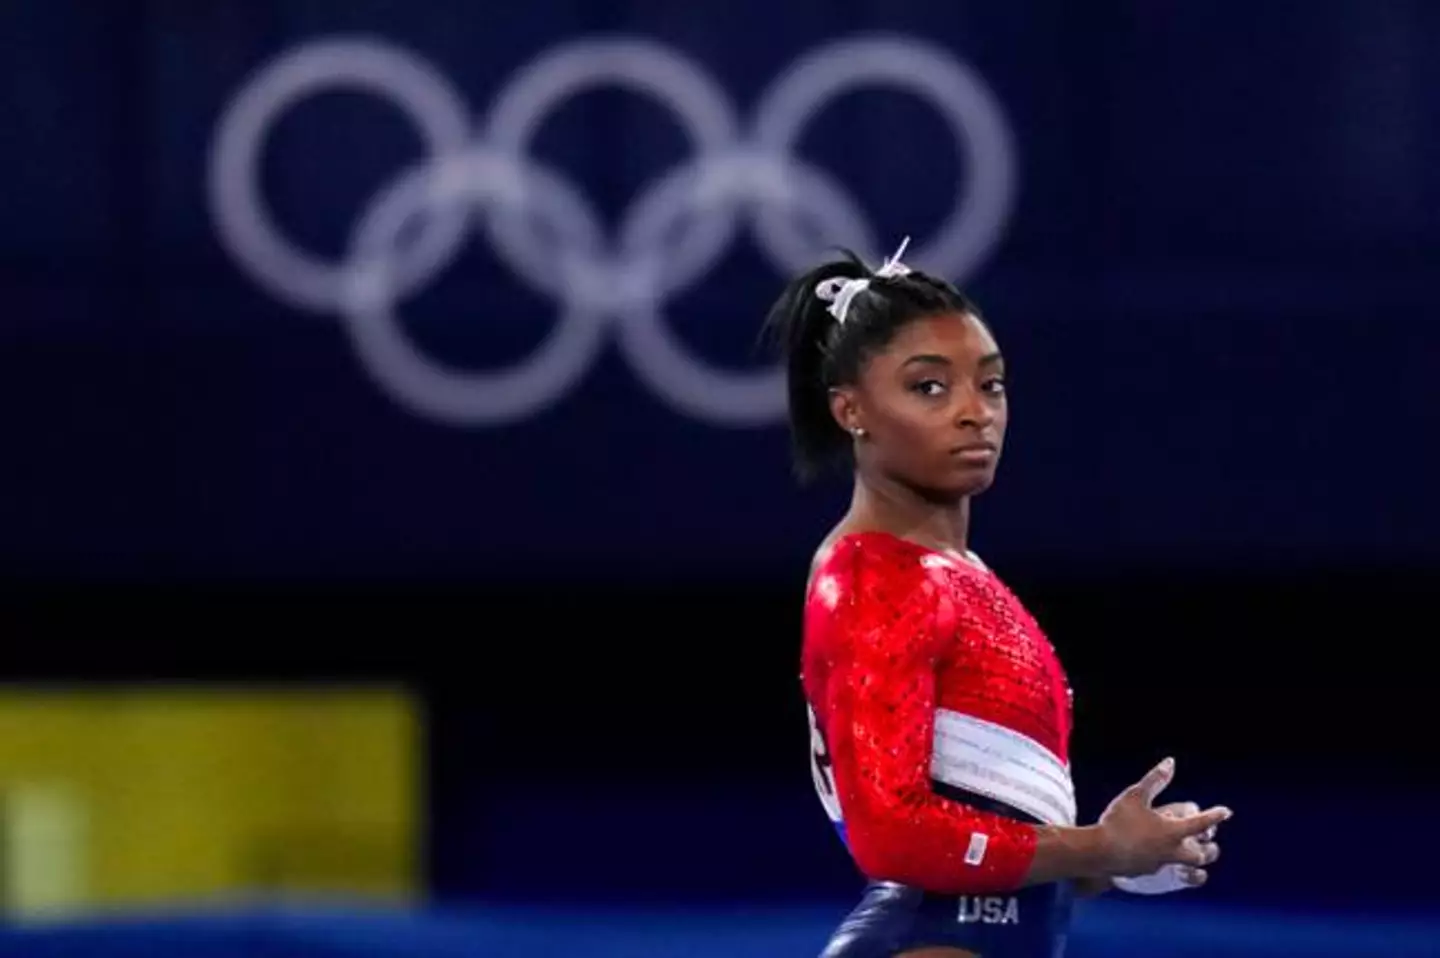 Simone is one of the world's greatest athletes (